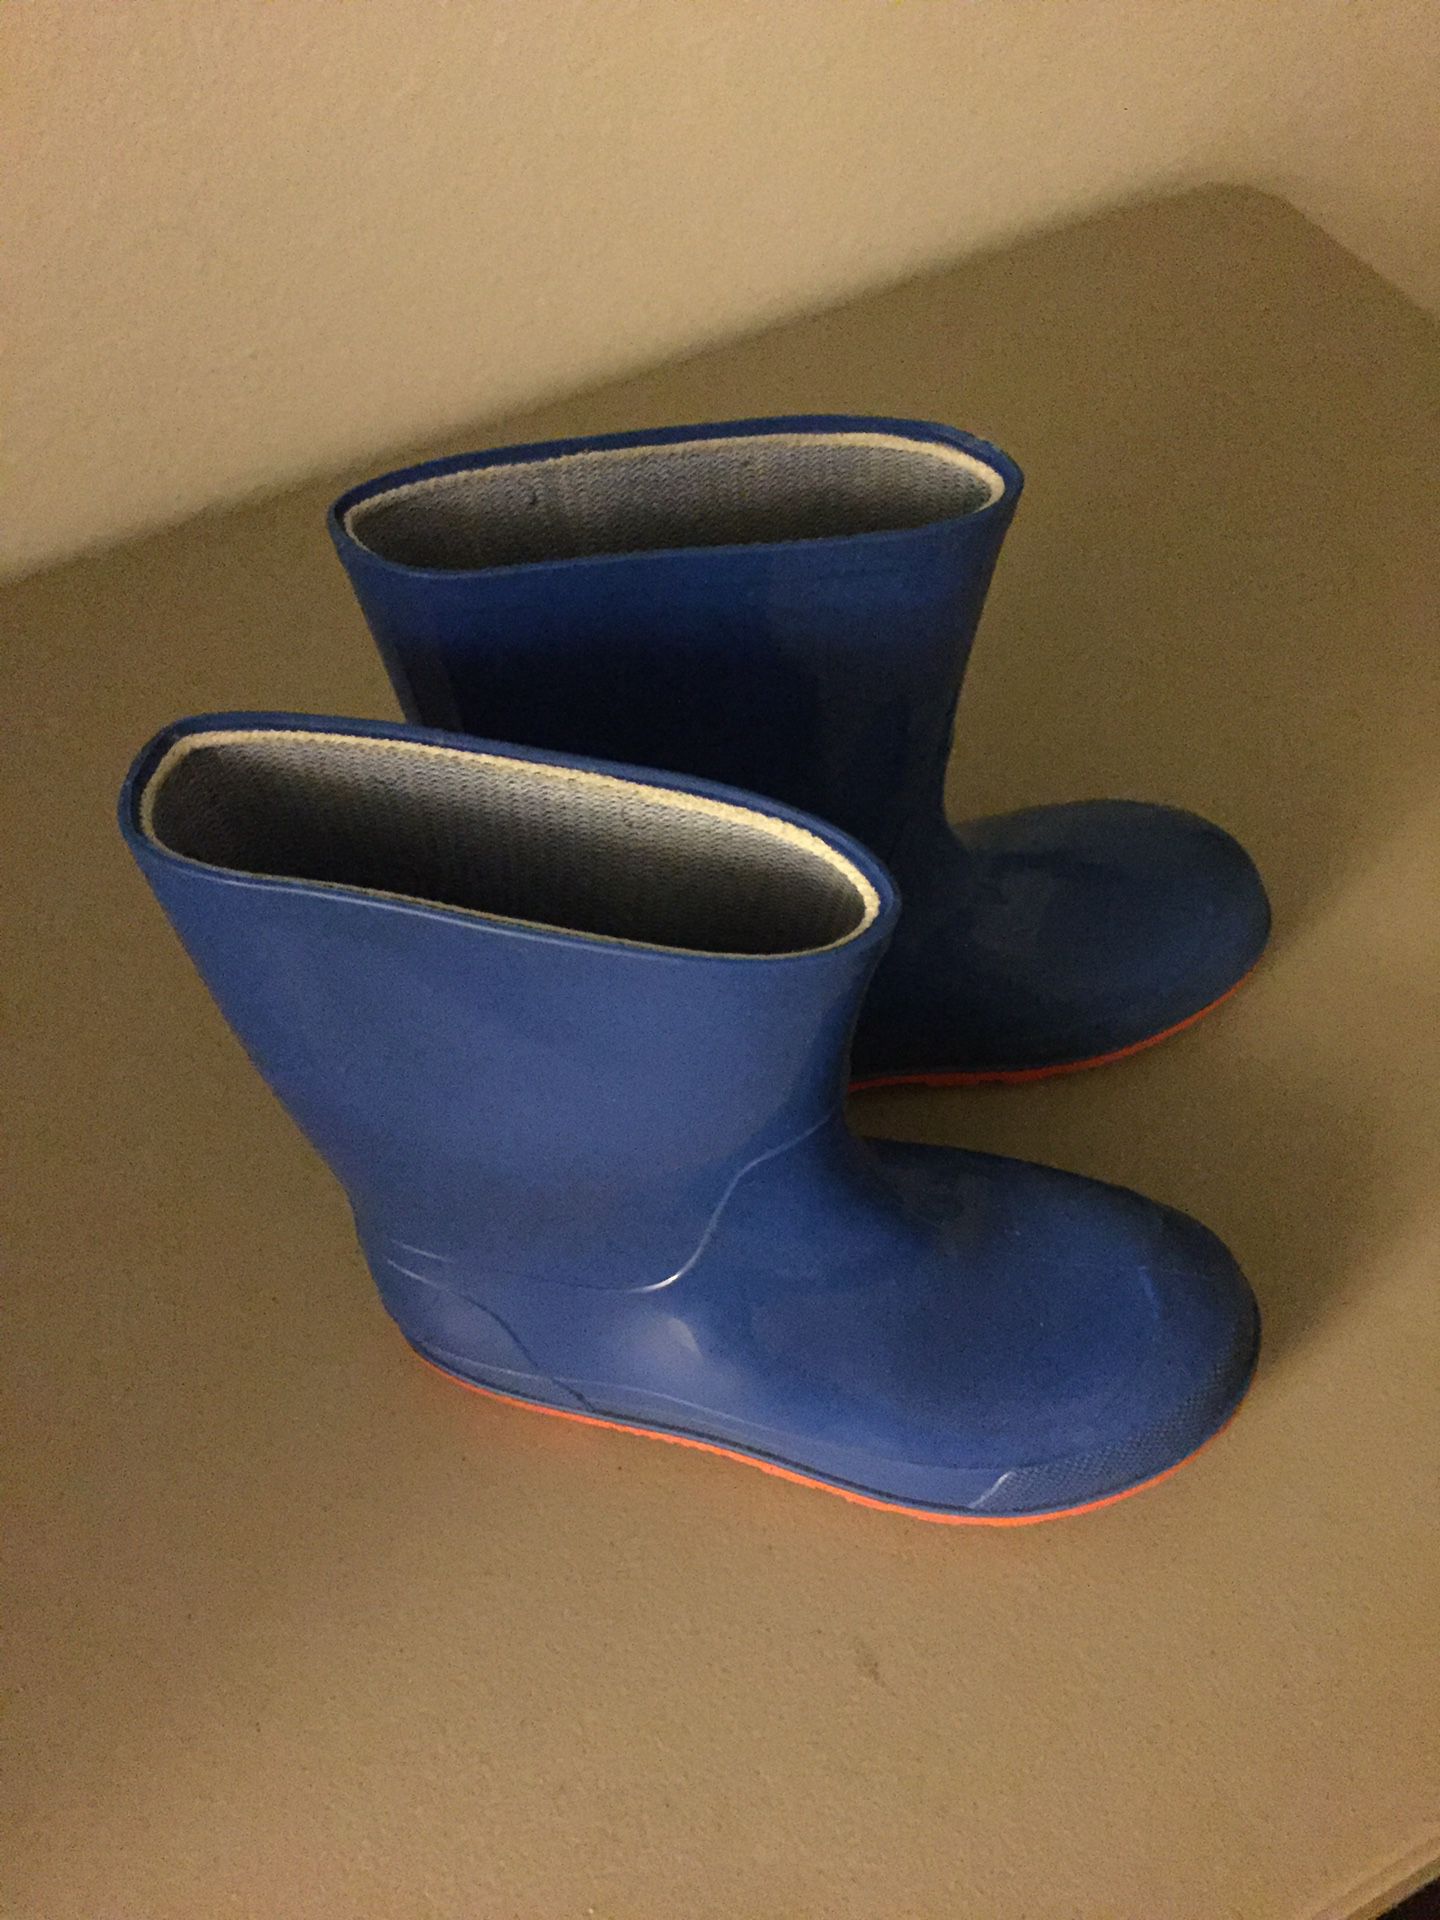 Rain boots- Almost new! Size 2-3